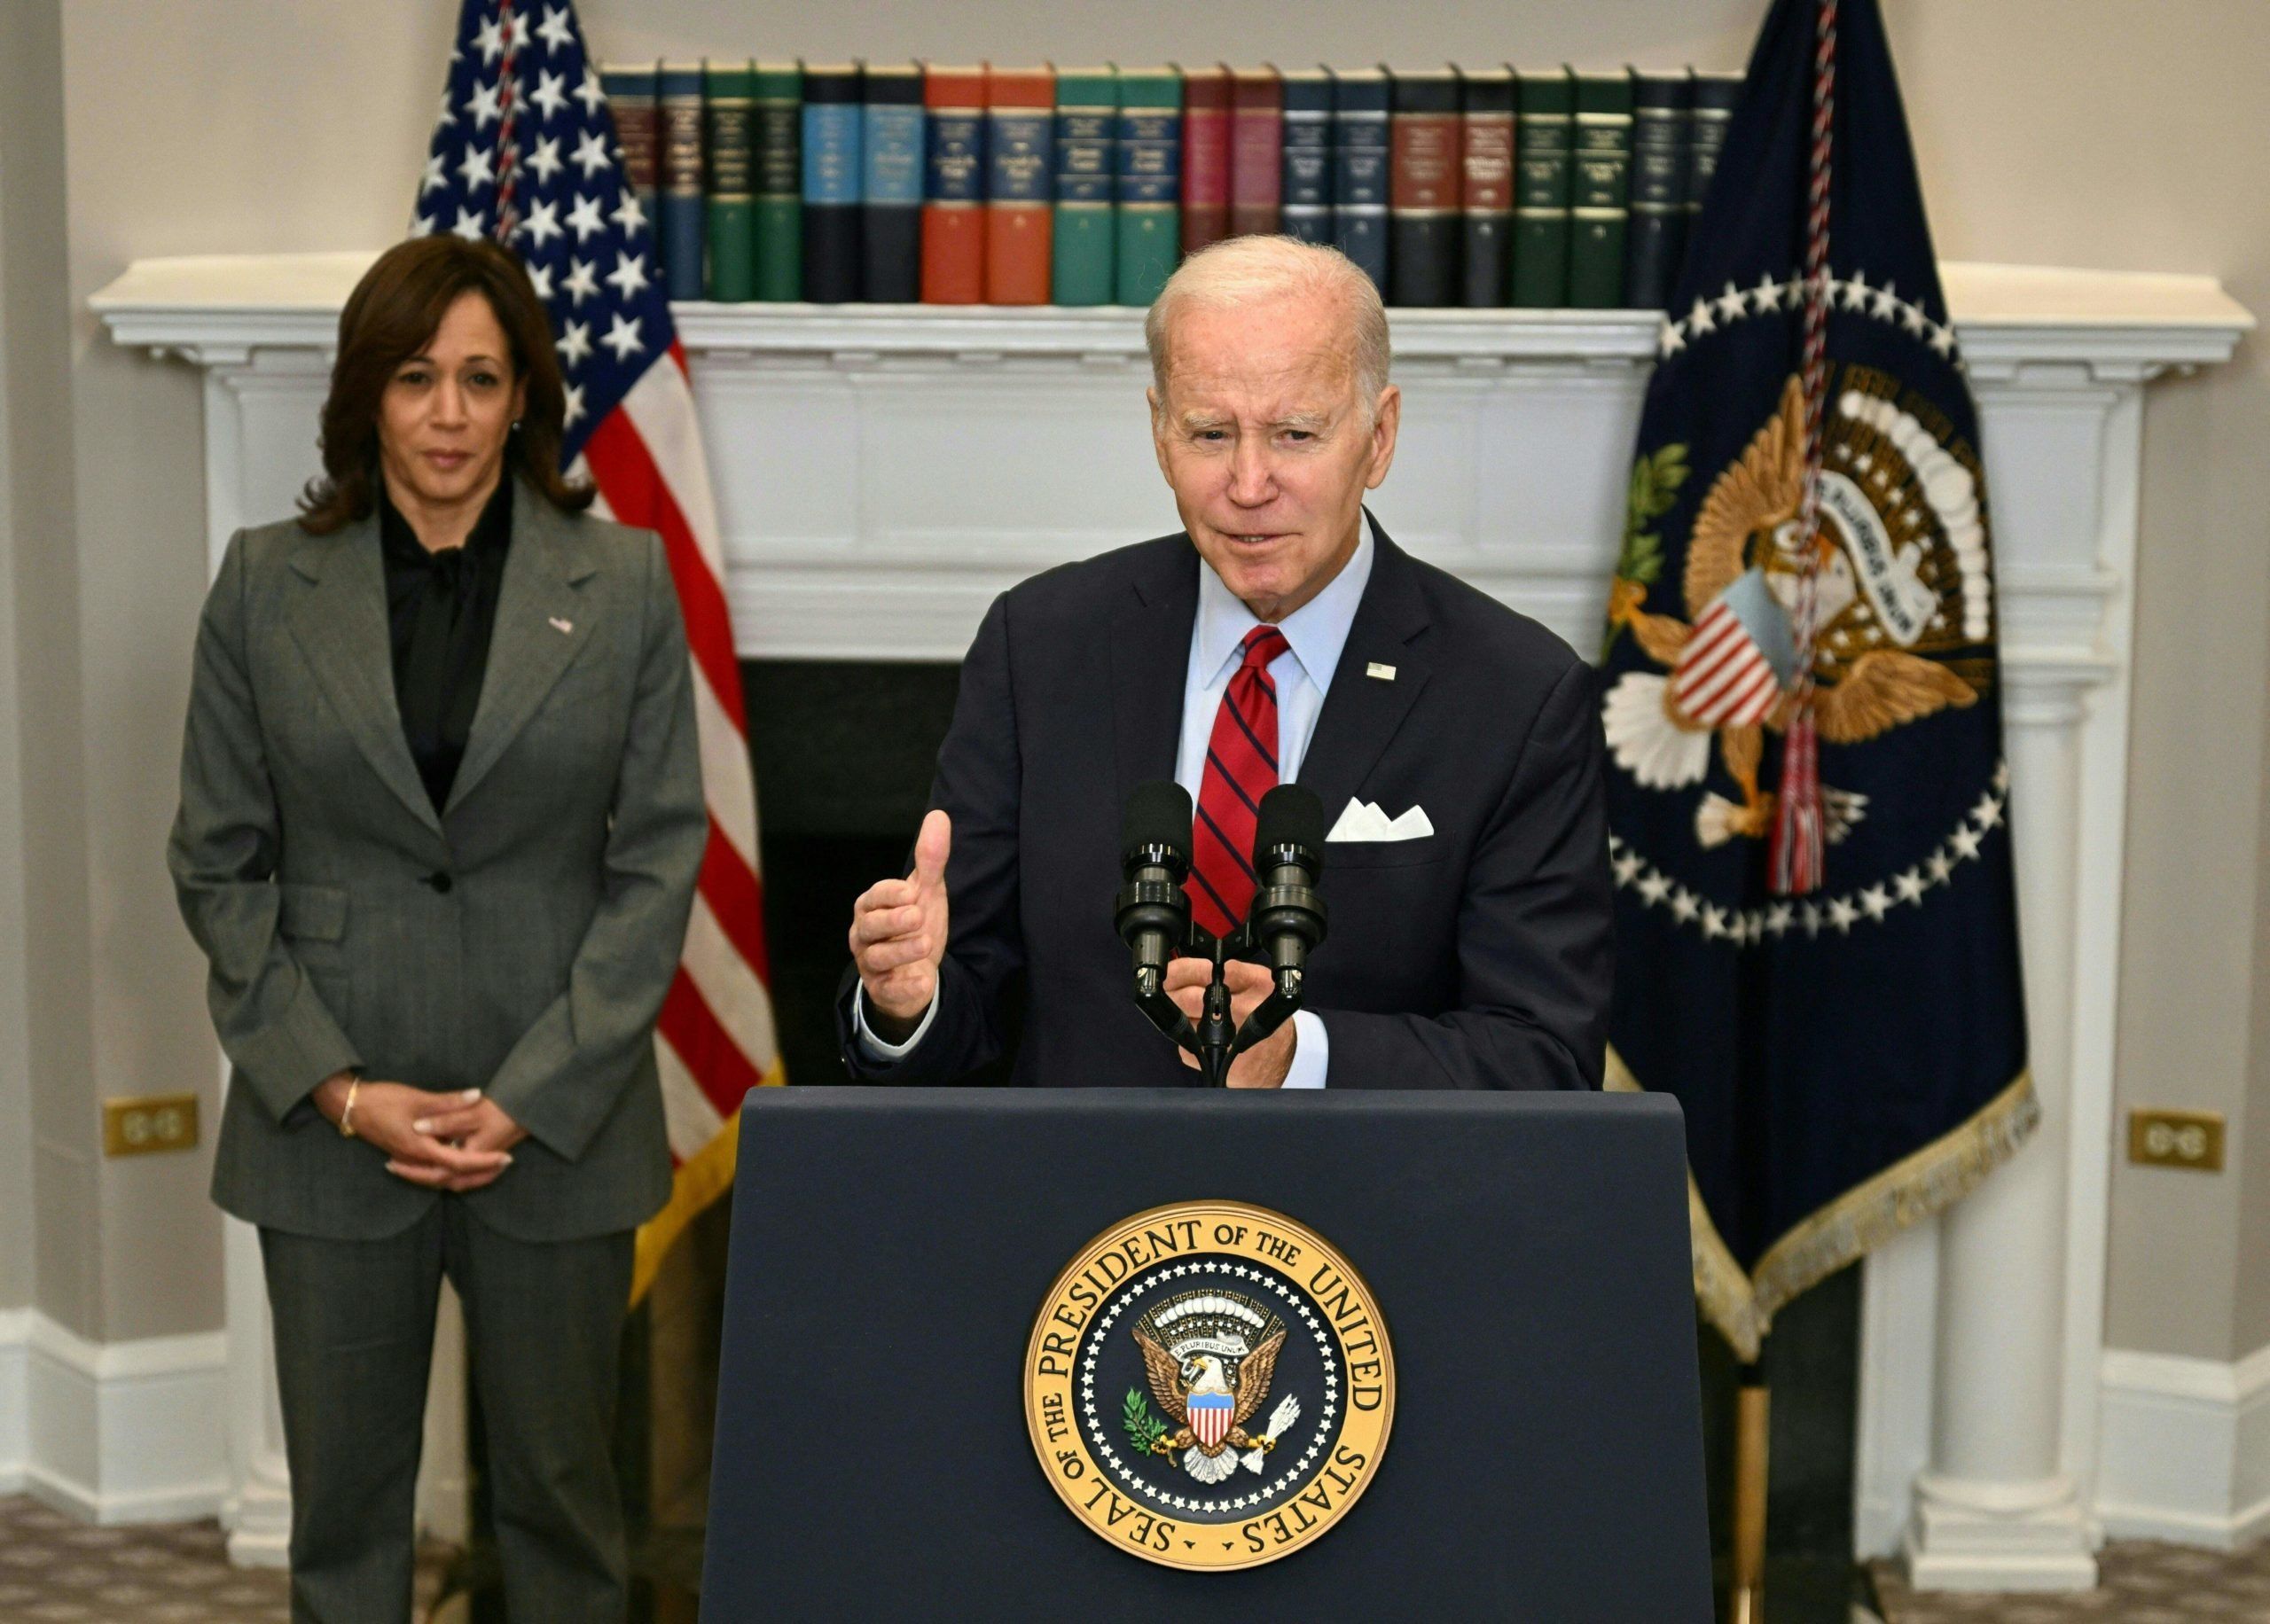 US President Joe Biden, with US Vice President Kamala Harris, speaks about border security and enforcement, in the Roosevelt Room of the White House in Washington, DC, on January 5, 2023. (Photo by Jim WATSON / AFP) (Photo by JIM WATSON/AFP via Getty Images)